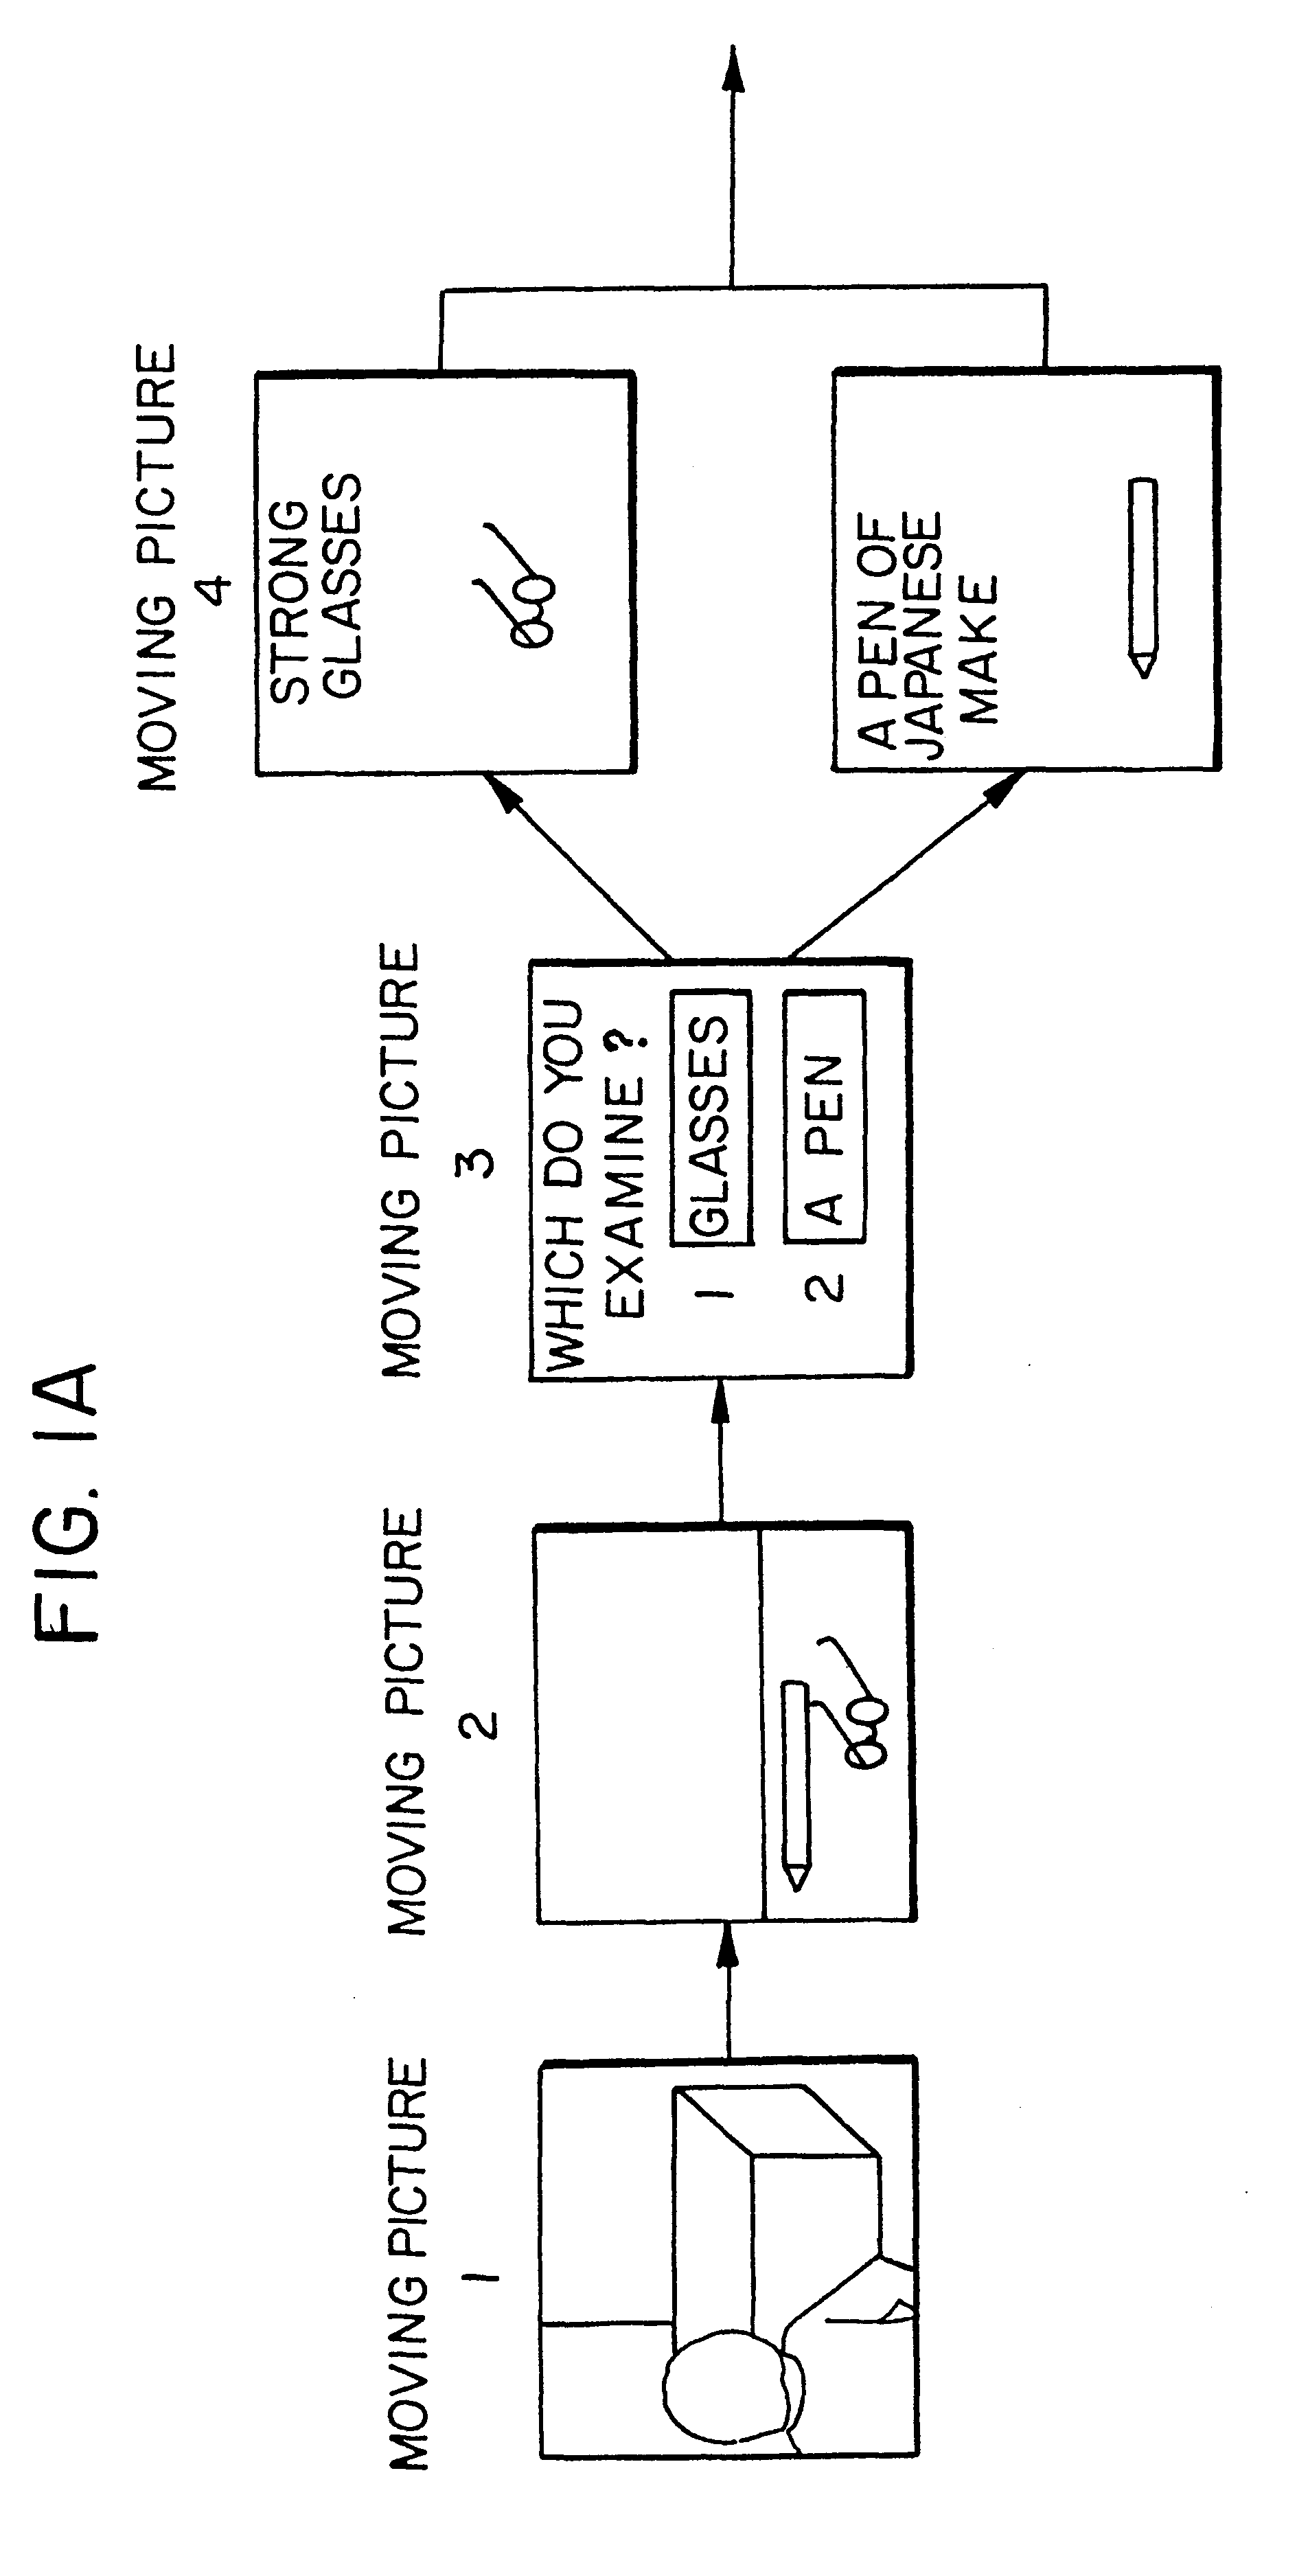 Multimedia optical disk, reproduction apparatus and method for achieving variable scene development based on interactive control